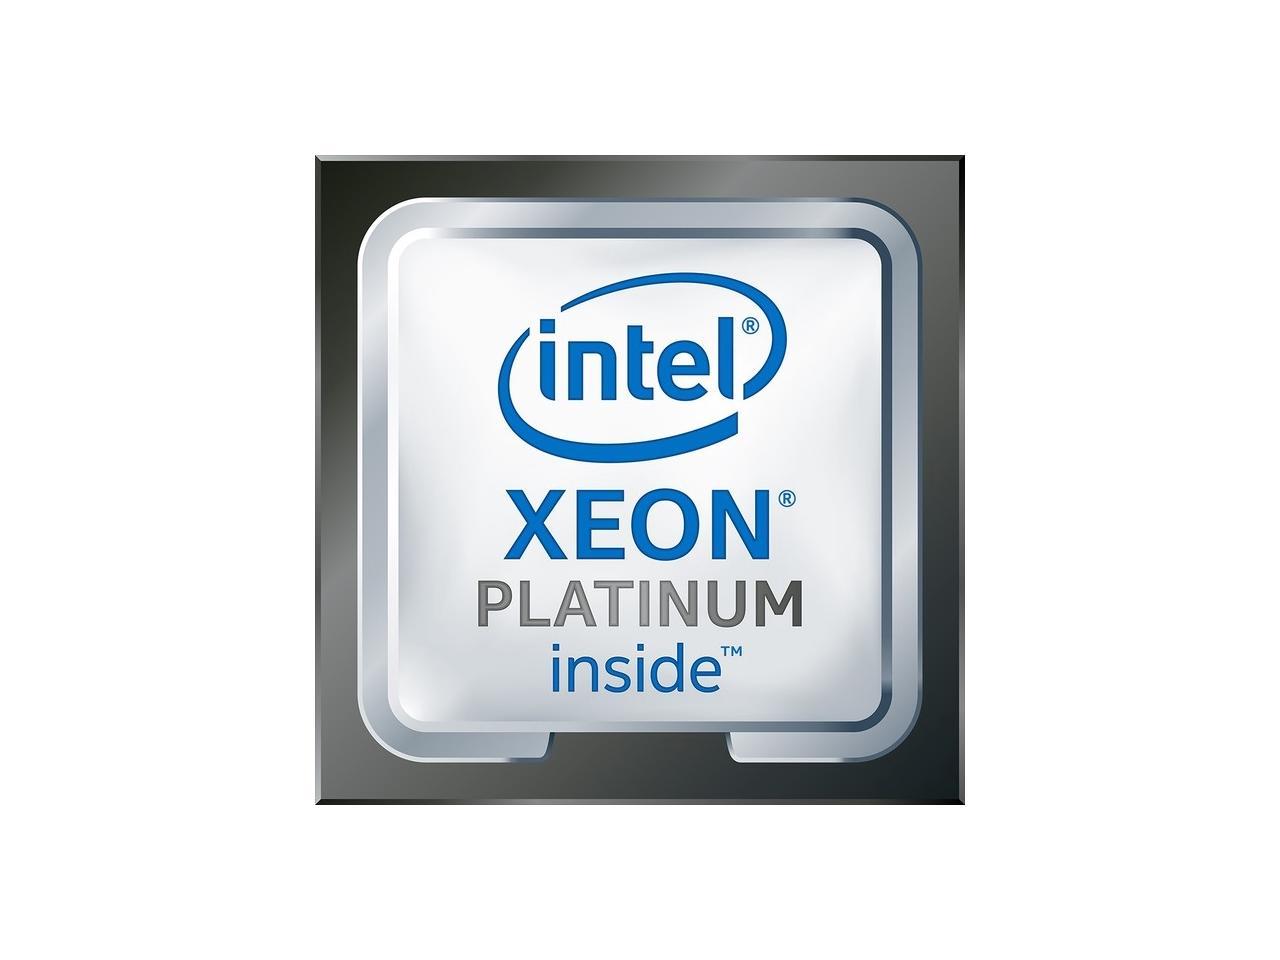 How Intel Xeon Server Technology Can Benefit Your Business